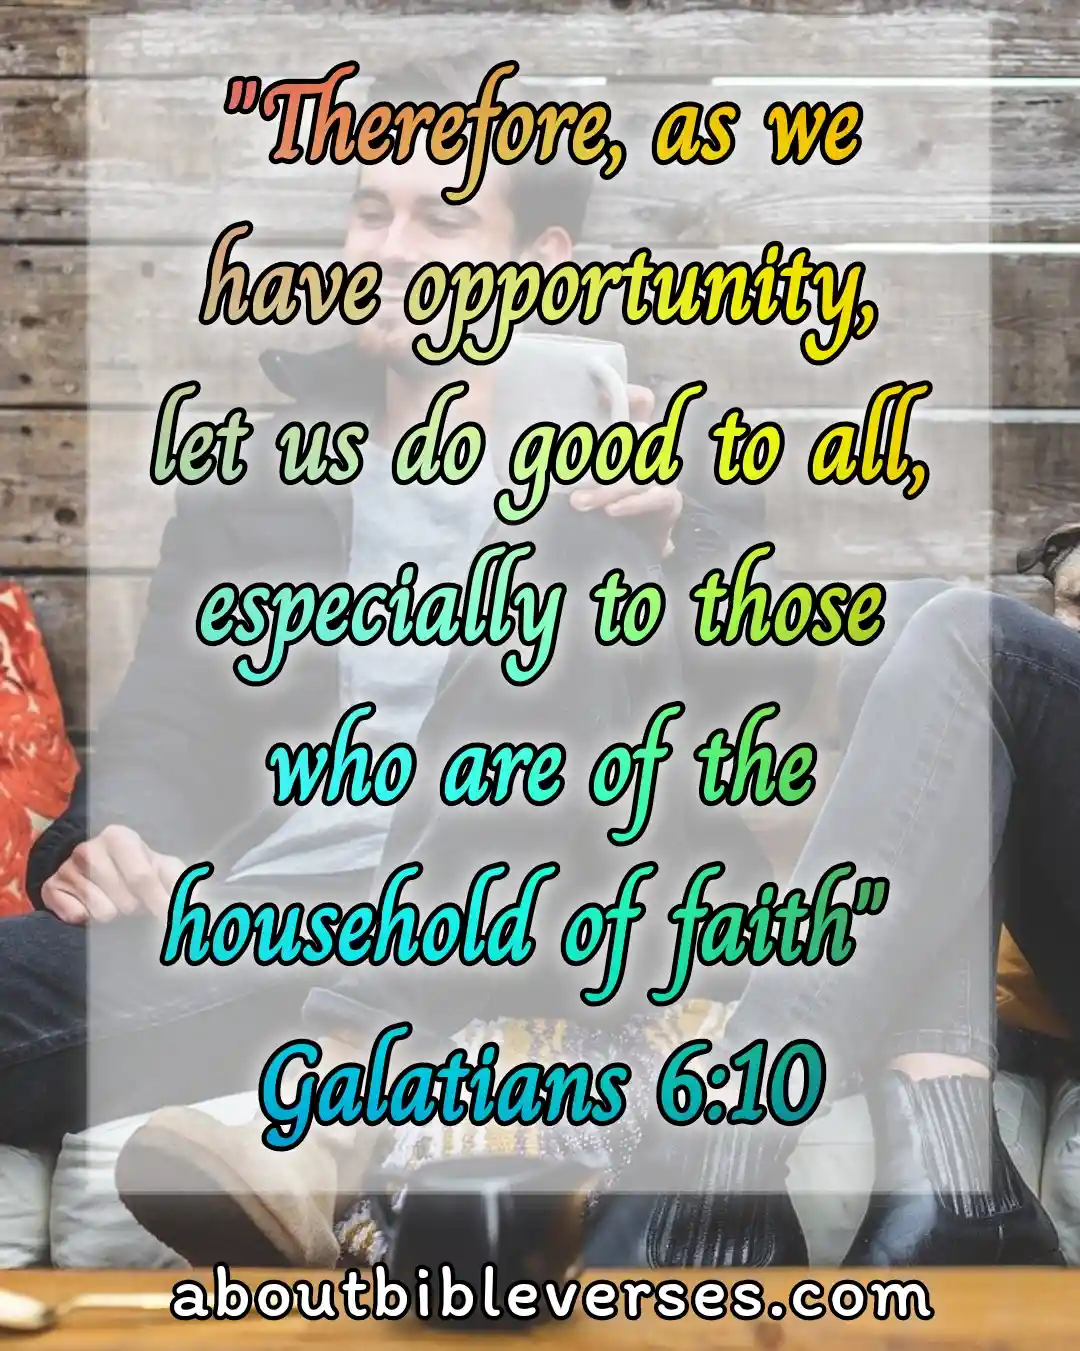 Bible Verses About Serving Others (Galatians 6:10)